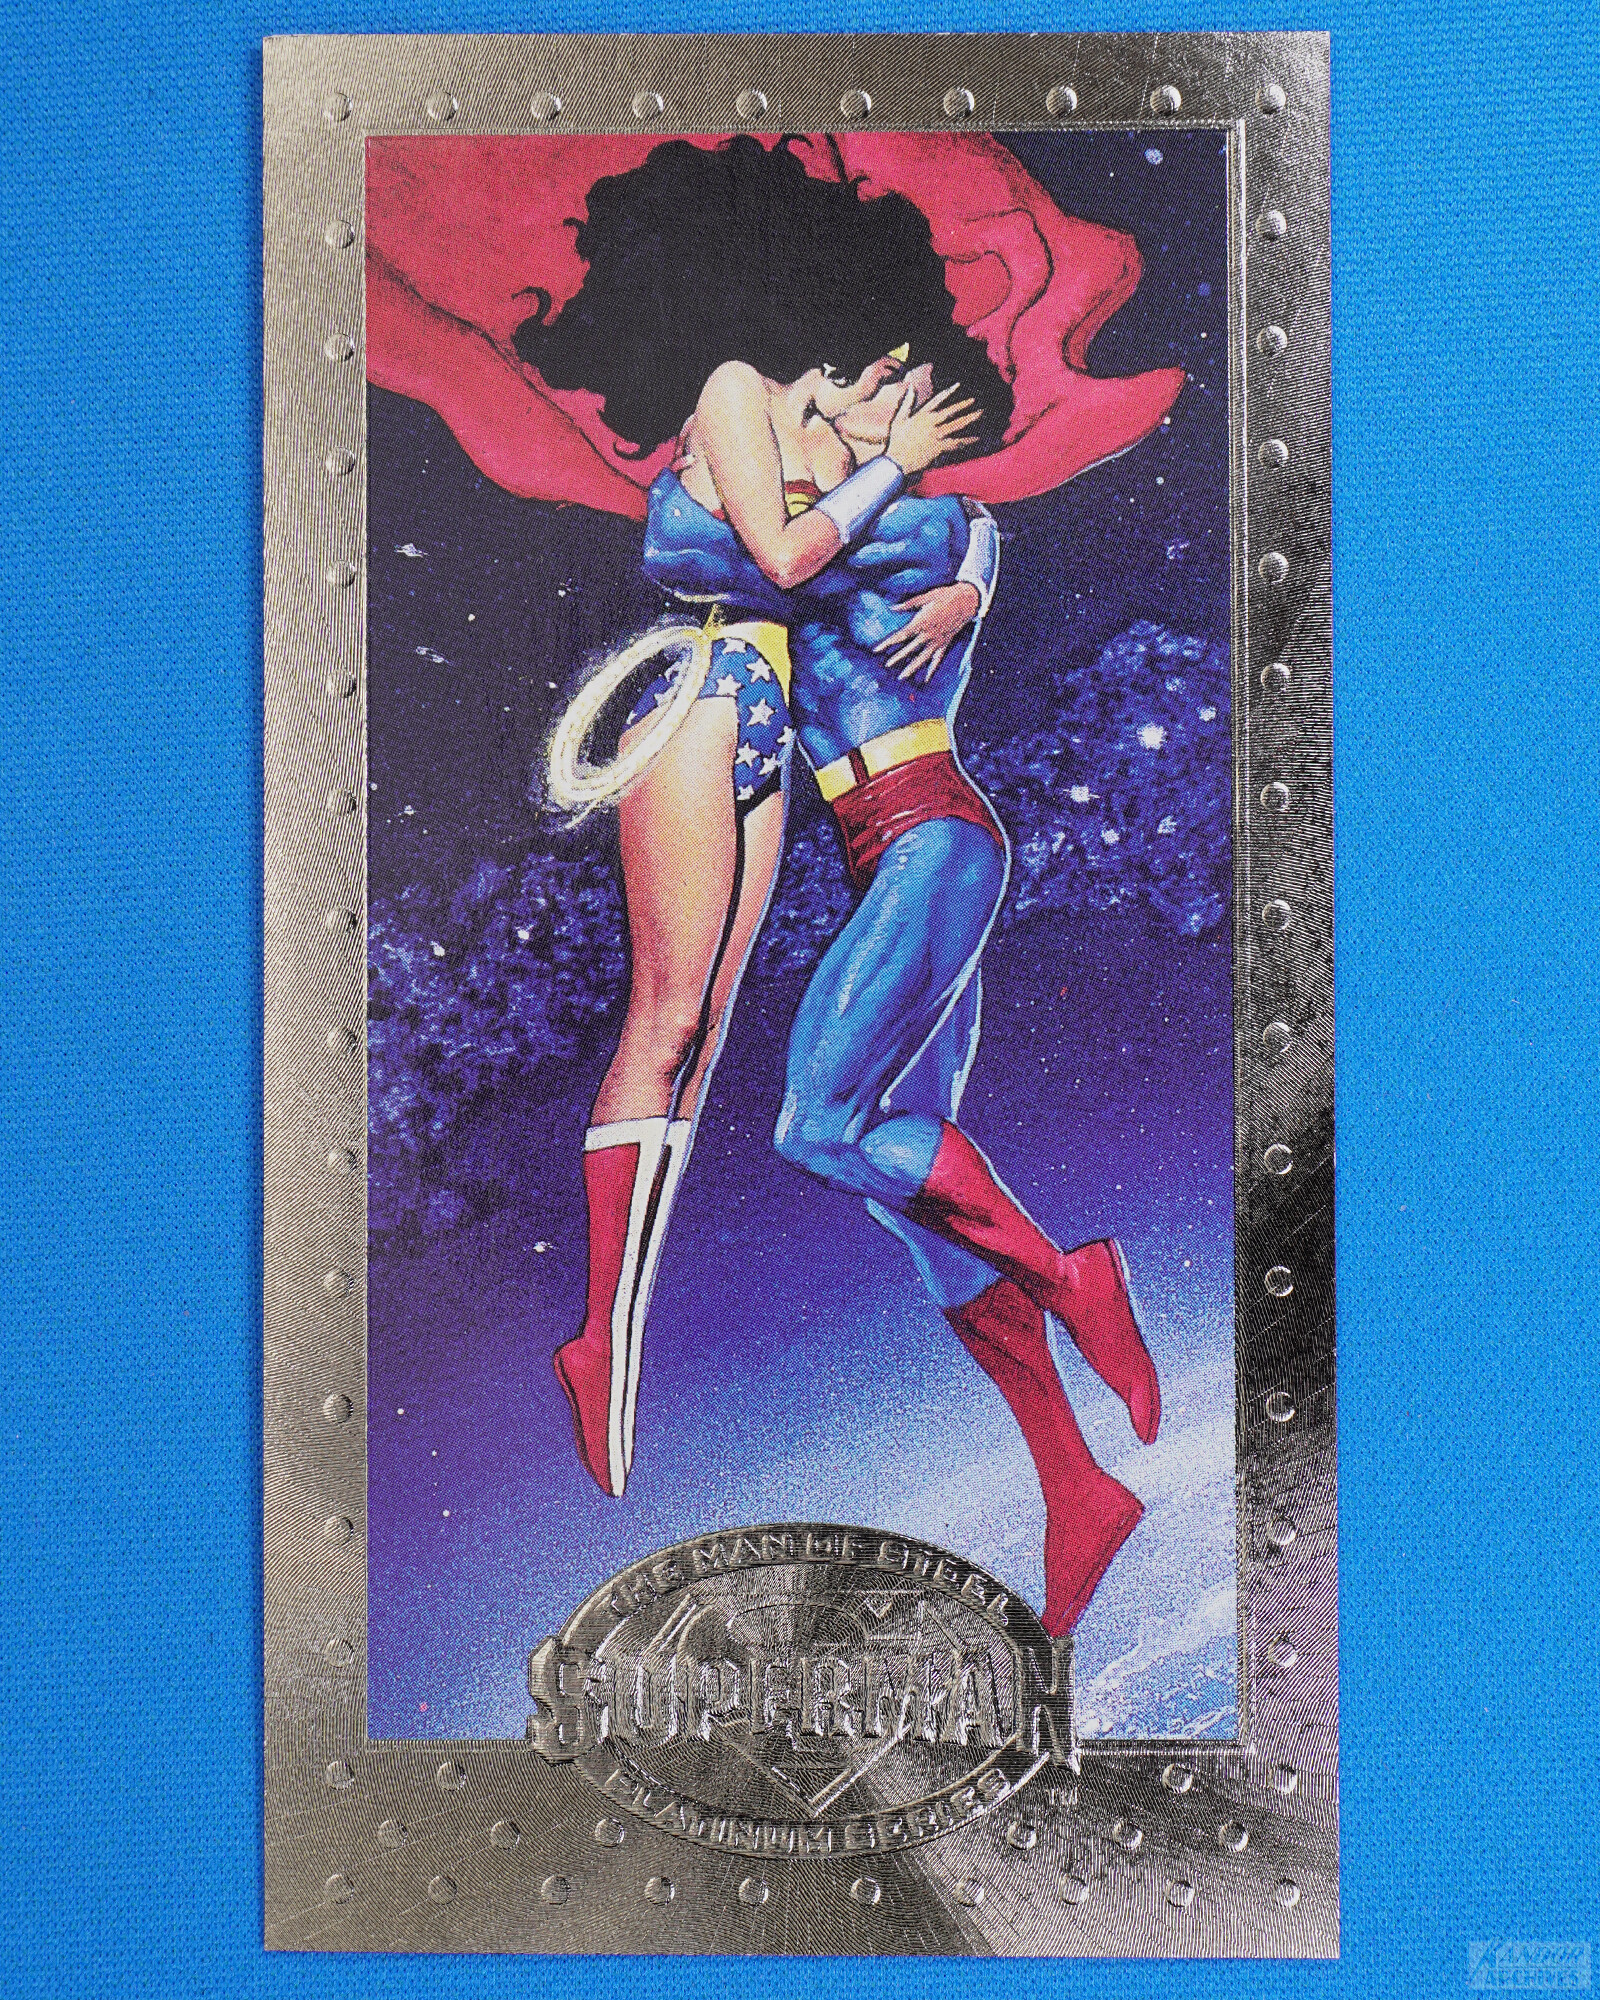 1994 SkyBox : Superman: The Man of Steel Platinum Series Premium Edition - #46 - Two of a Kind